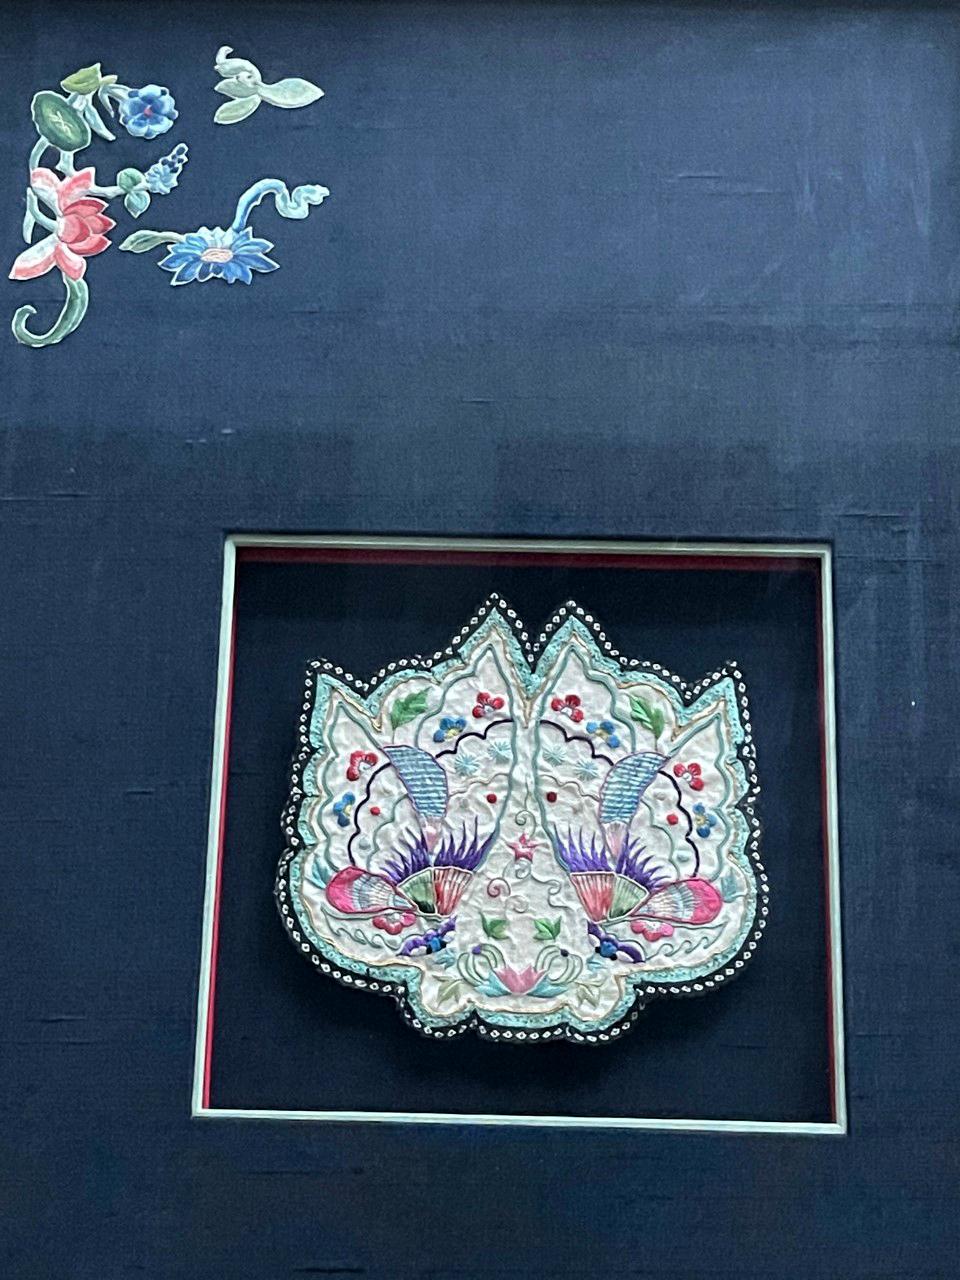 A beautiful antique embroidered purse from China, circa 19th century Qing dynasty, artistically displayed in a giltwood shadow box frame with contrast deep blue color cloth matts. Owned by a noble lady, this purse would be for precious personal use